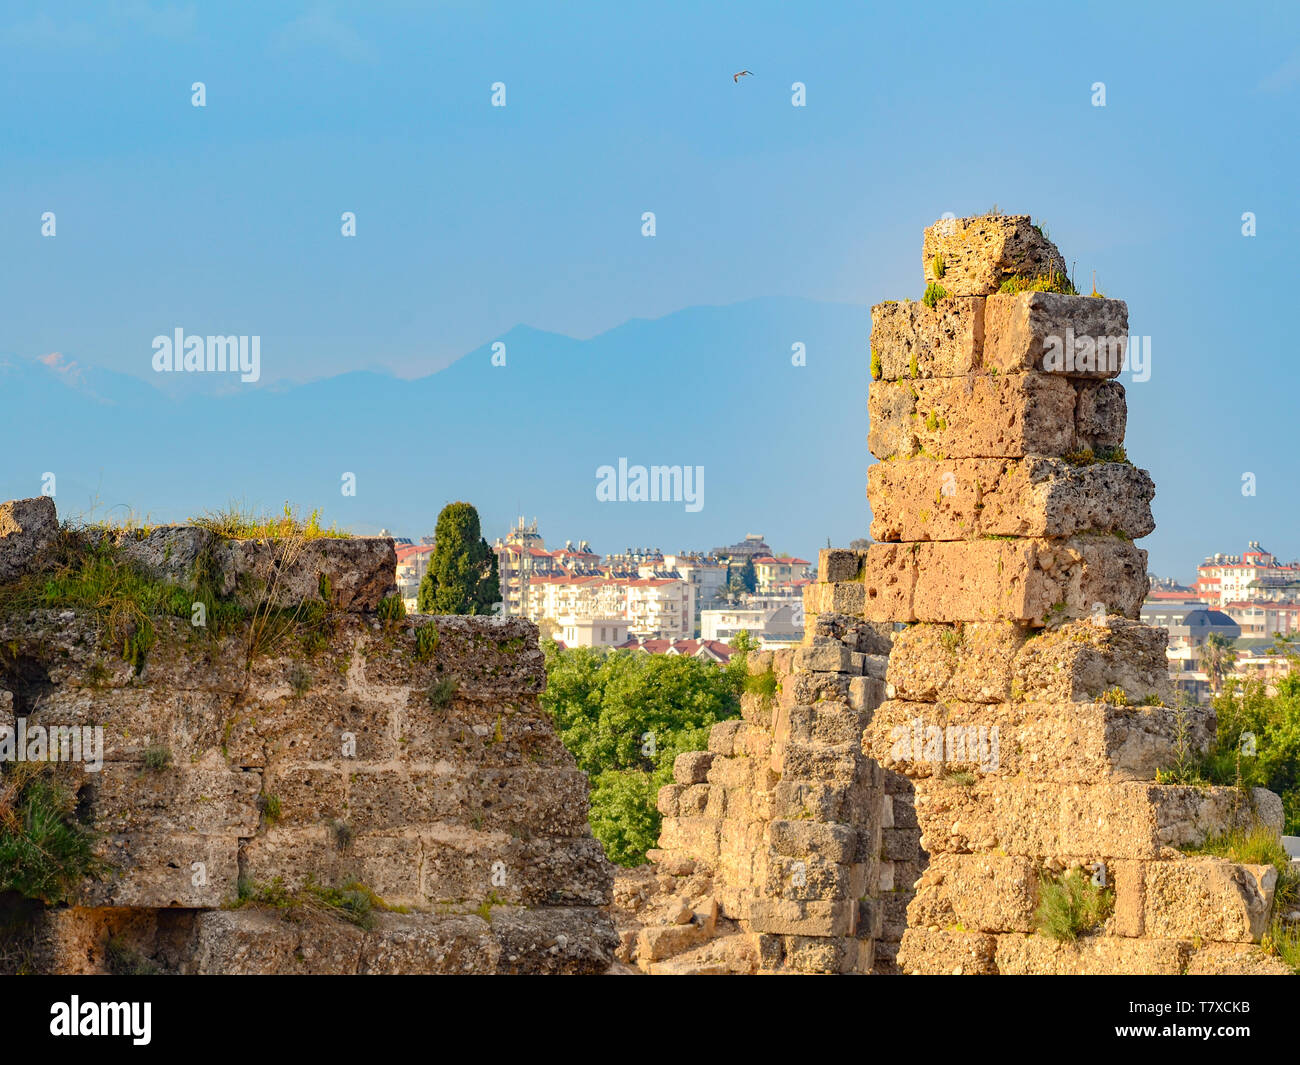 The ruins of an ancient city close up on the background of the modern town and mountains. Concept of destruction and rebirth Stock Photo